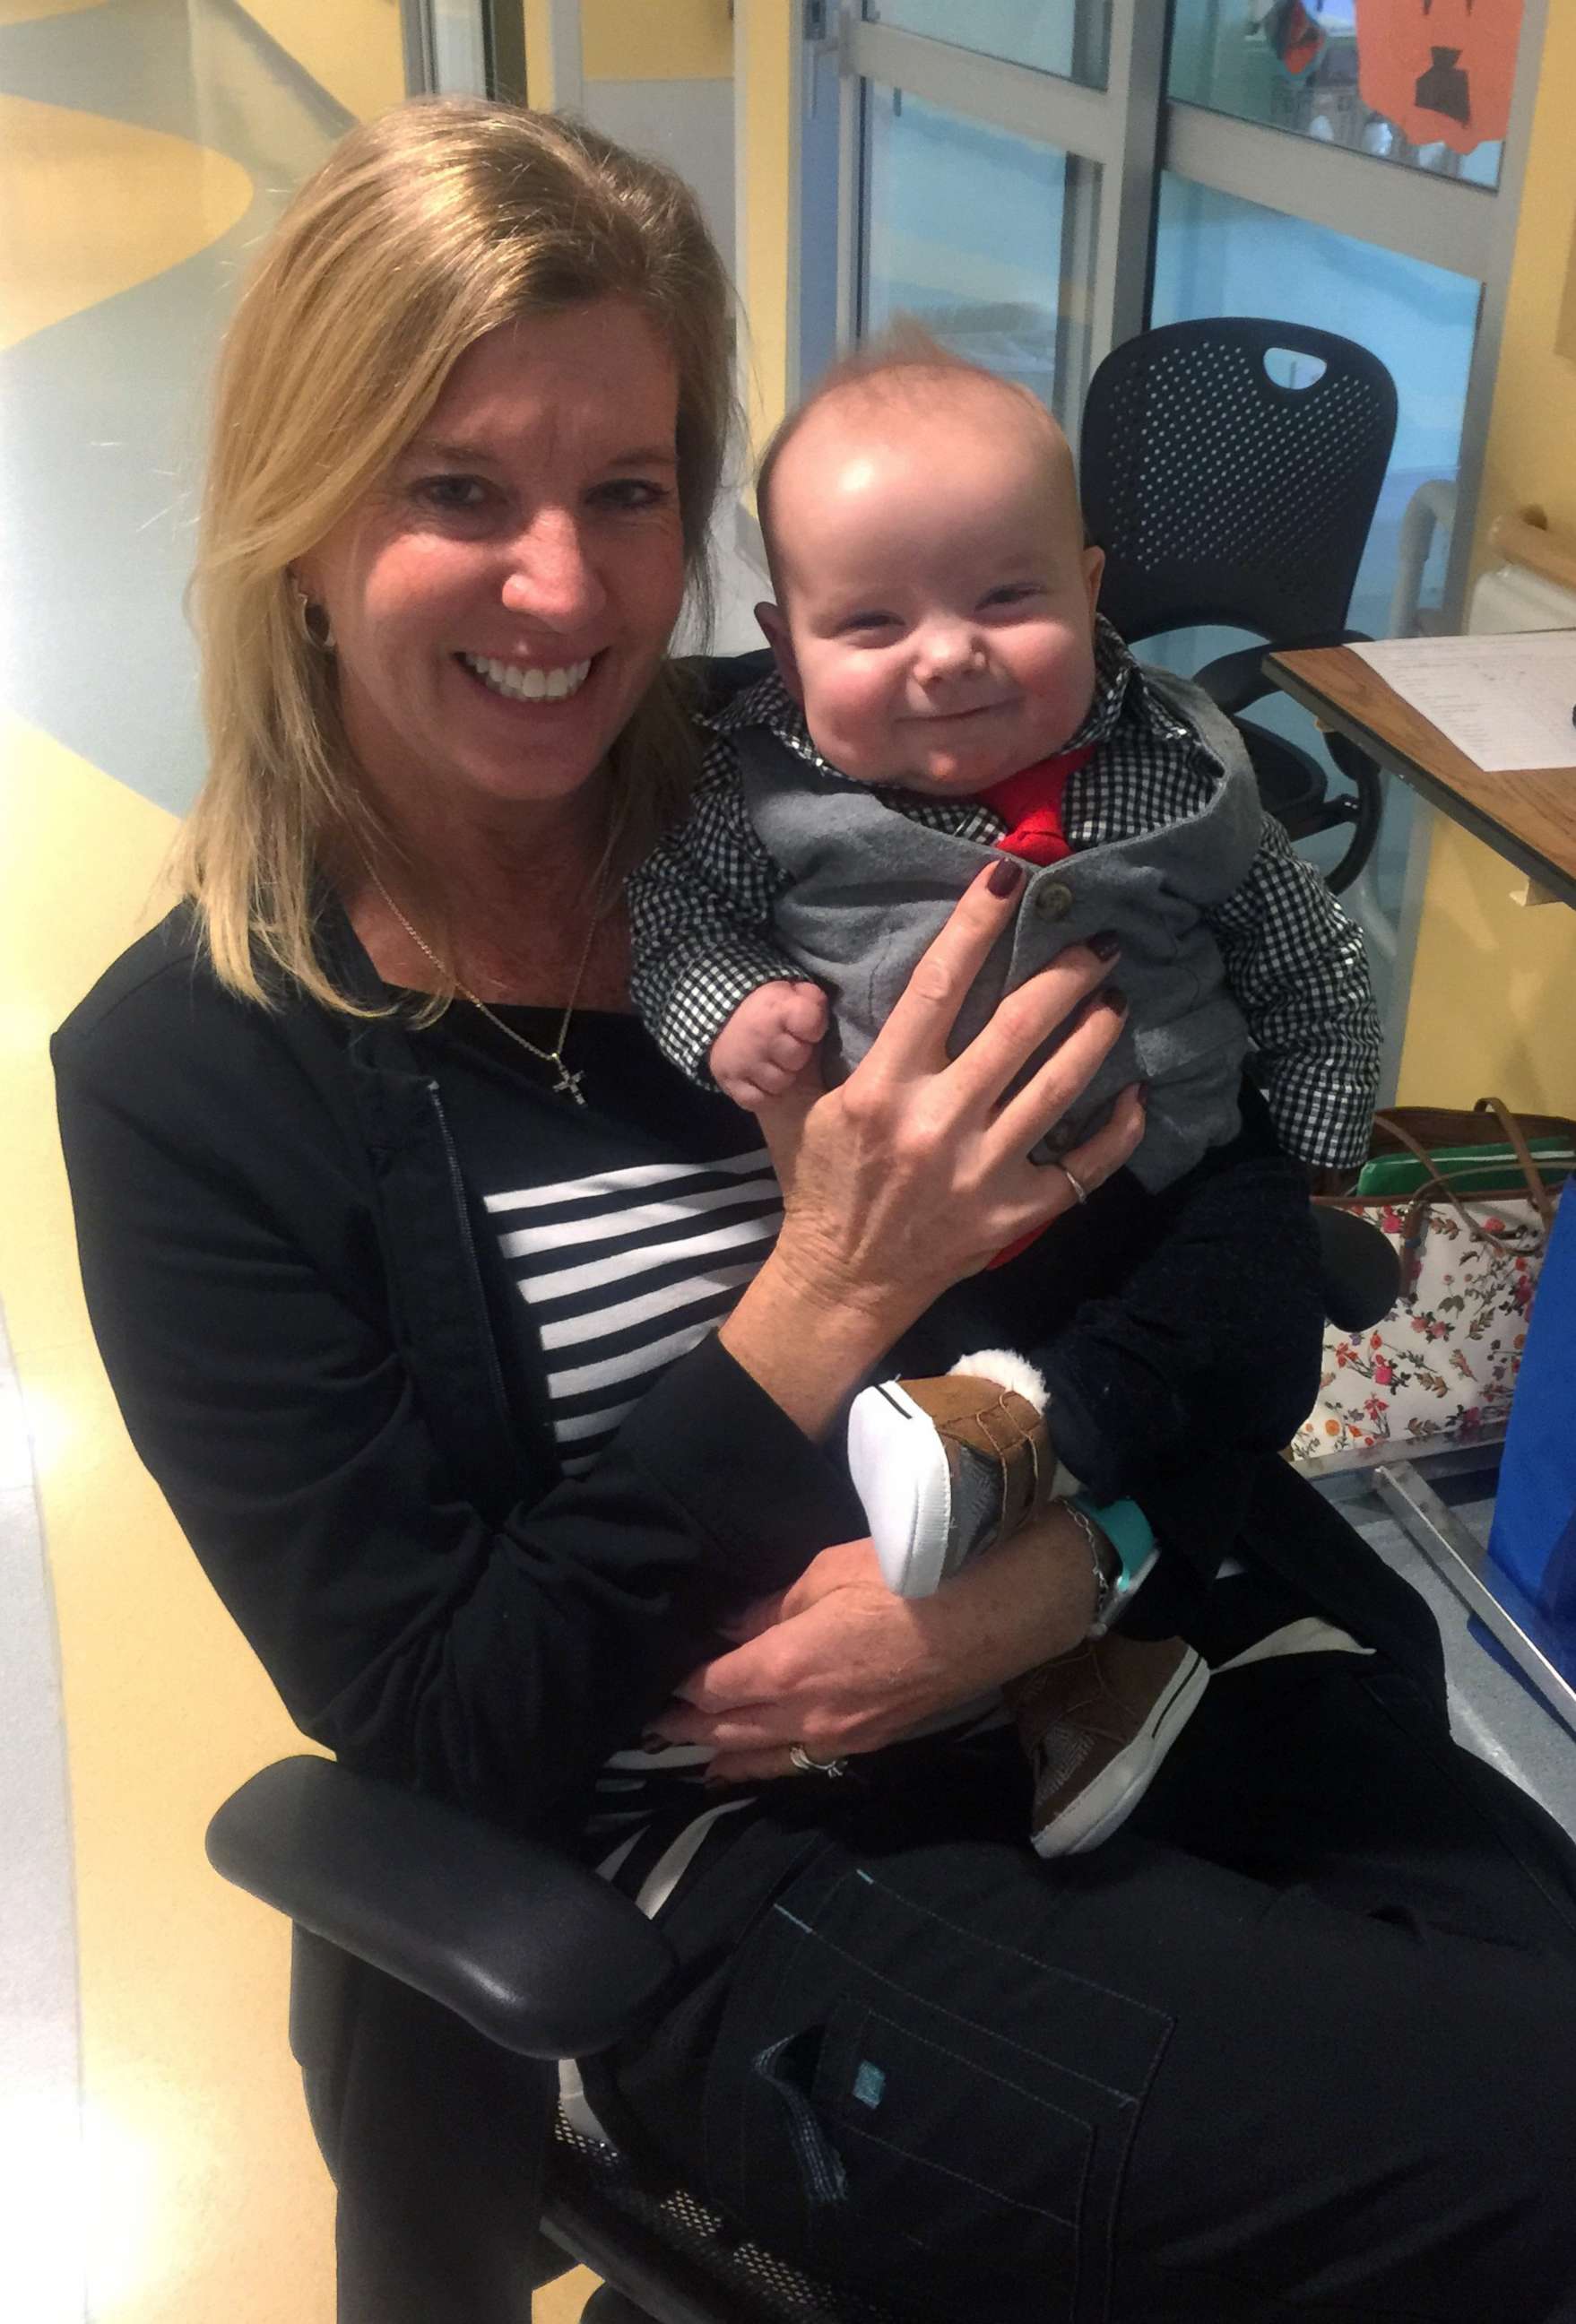 PHOTO: Angela Farnan, a primary charge nurse in the pediatric intensive care unit at OSF Children's Hospital of Illinois, adopted her son Blaze, 1, after caring for him in the ICU.